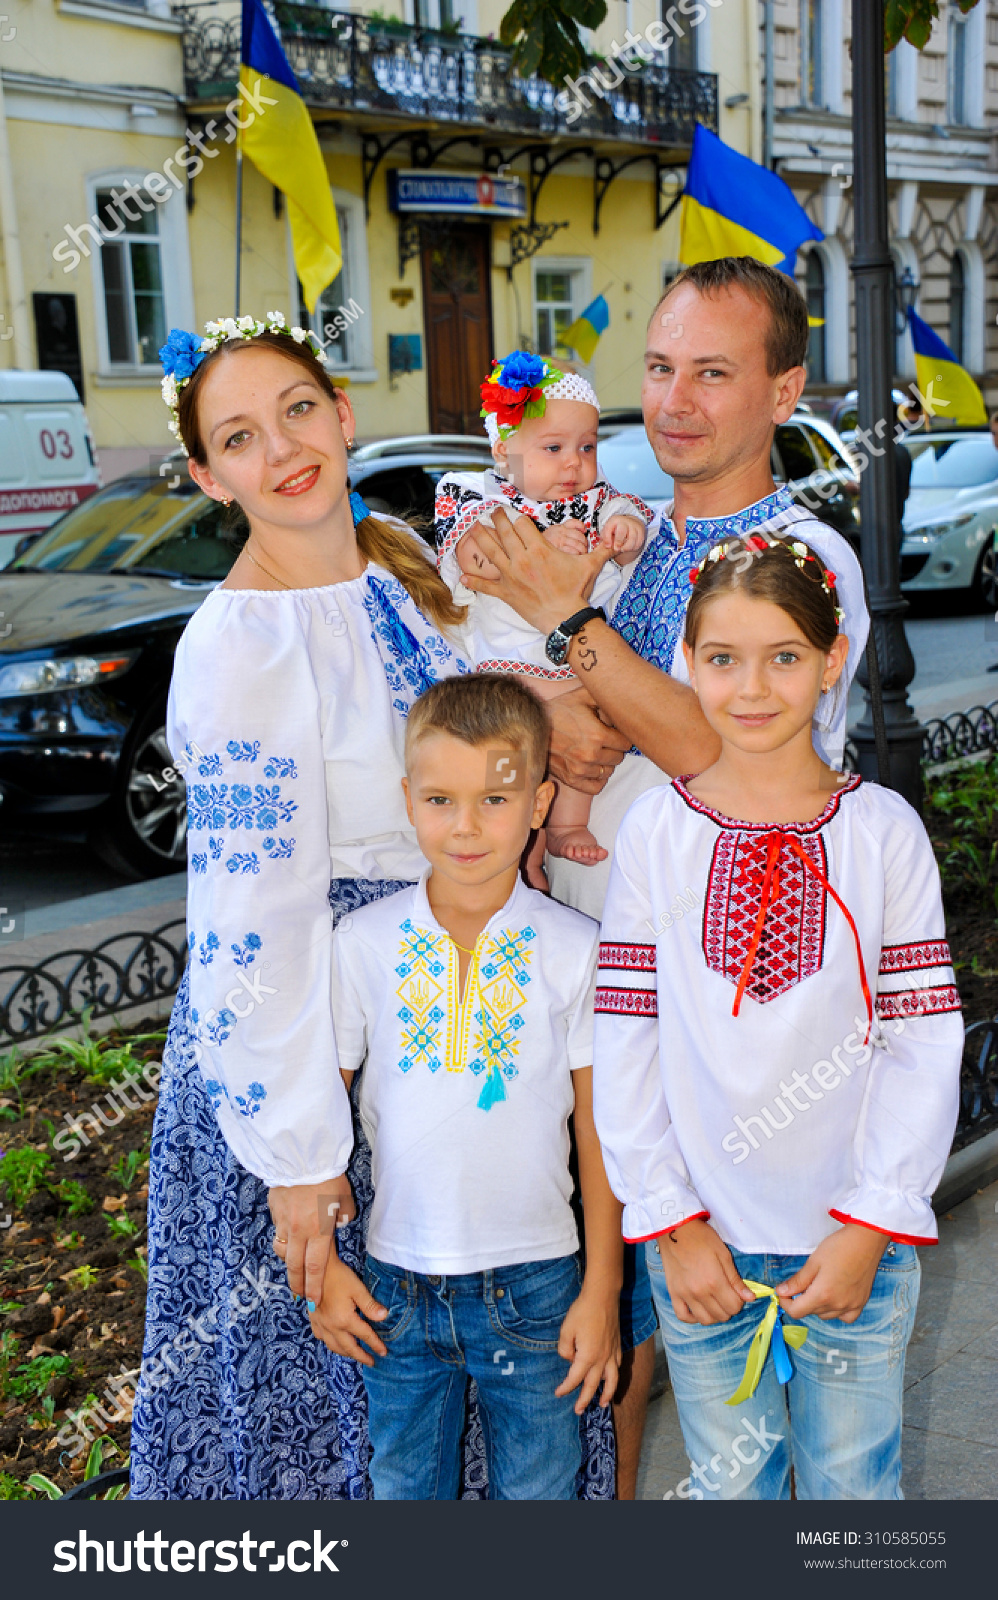 stock-photo-odessa-ukraine-august-ukrainian-family-in-national-costumes-at-independence-day-on-august-310585055.jpg